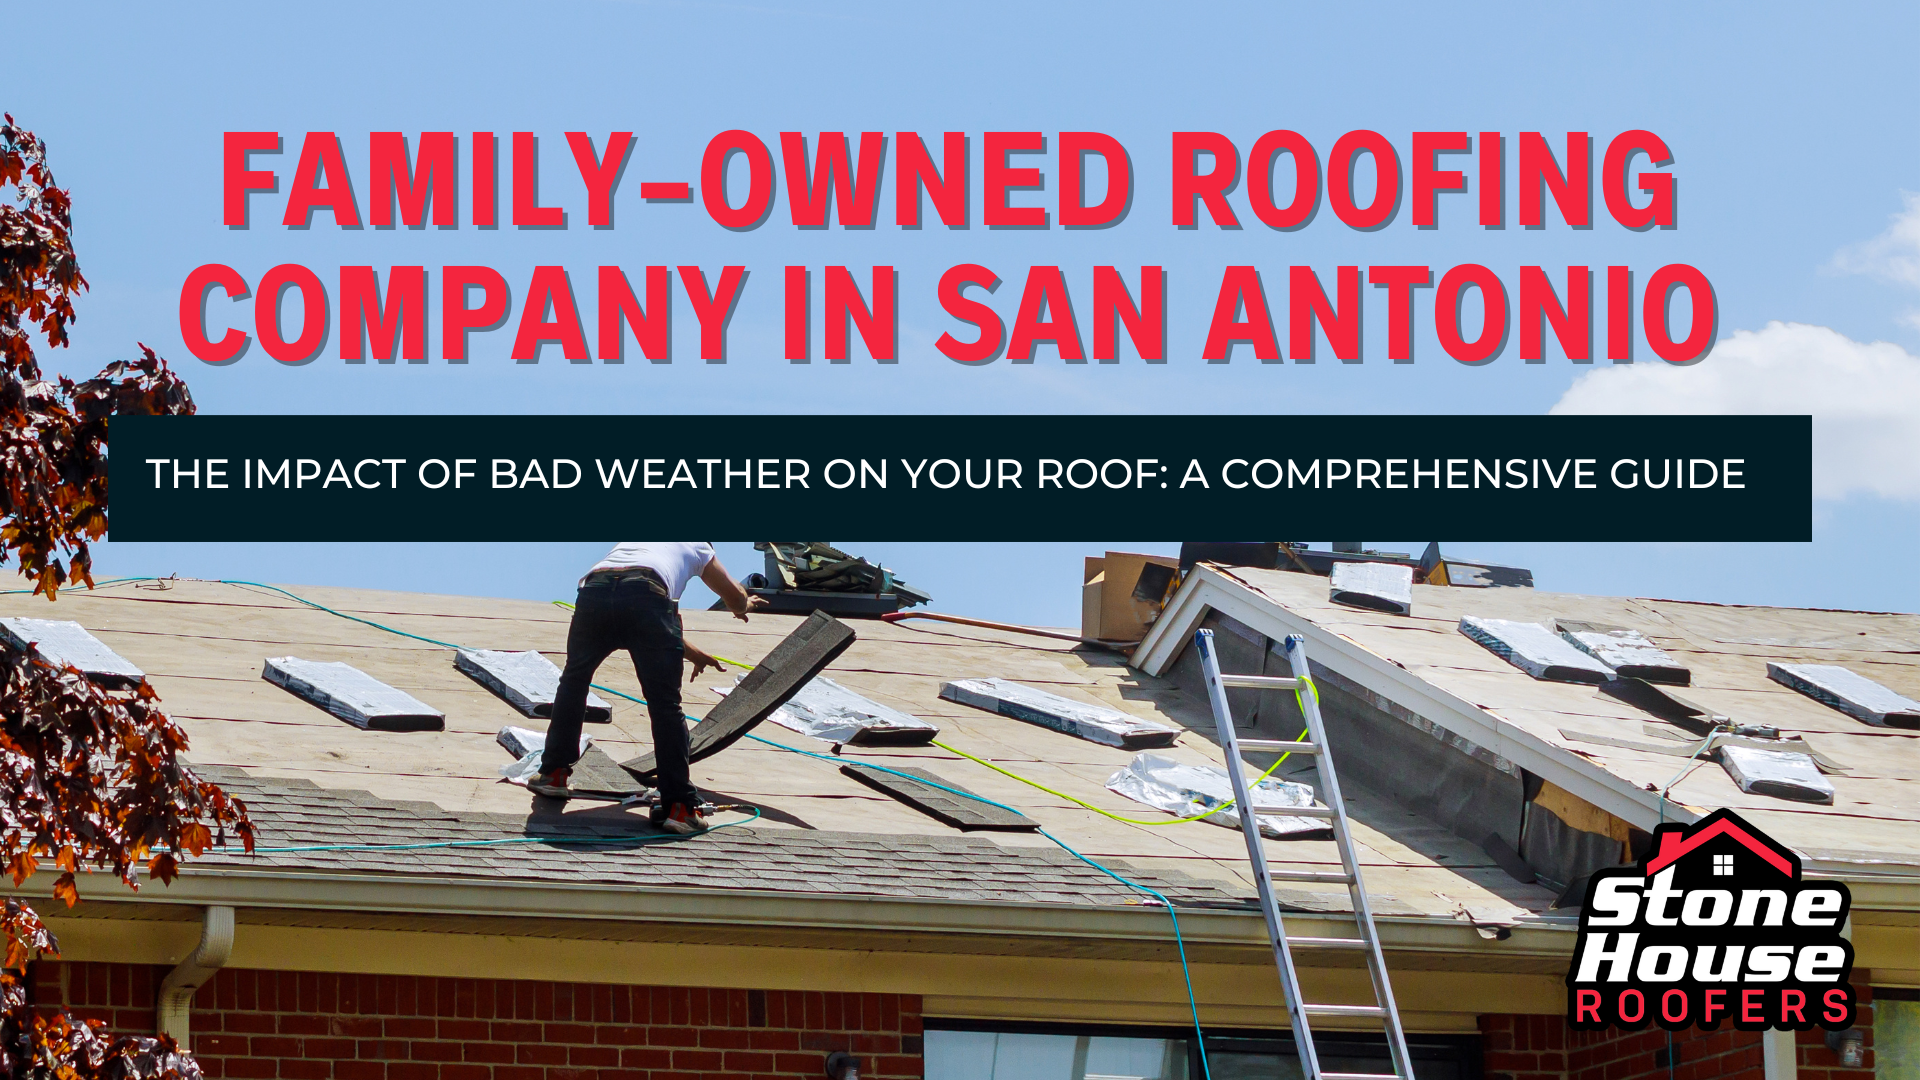 The Impact Of Bad Weather On Your Roof: A Comprehensive Guide